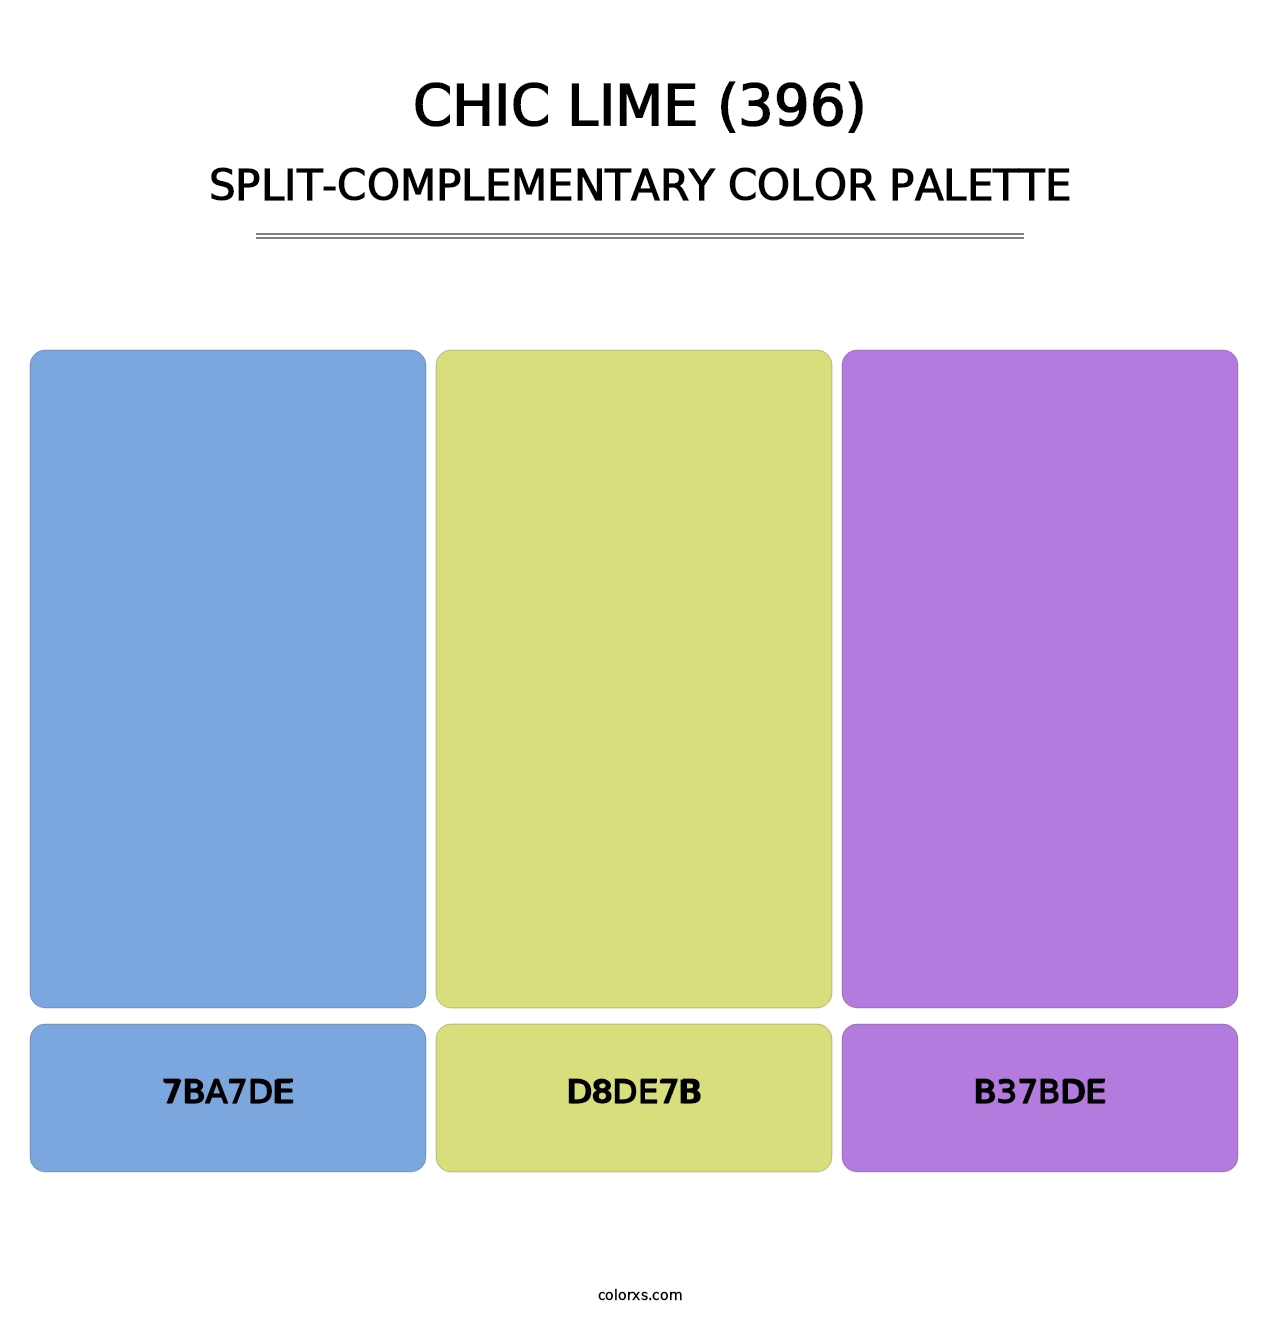 Chic Lime (396) - Split-Complementary Color Palette